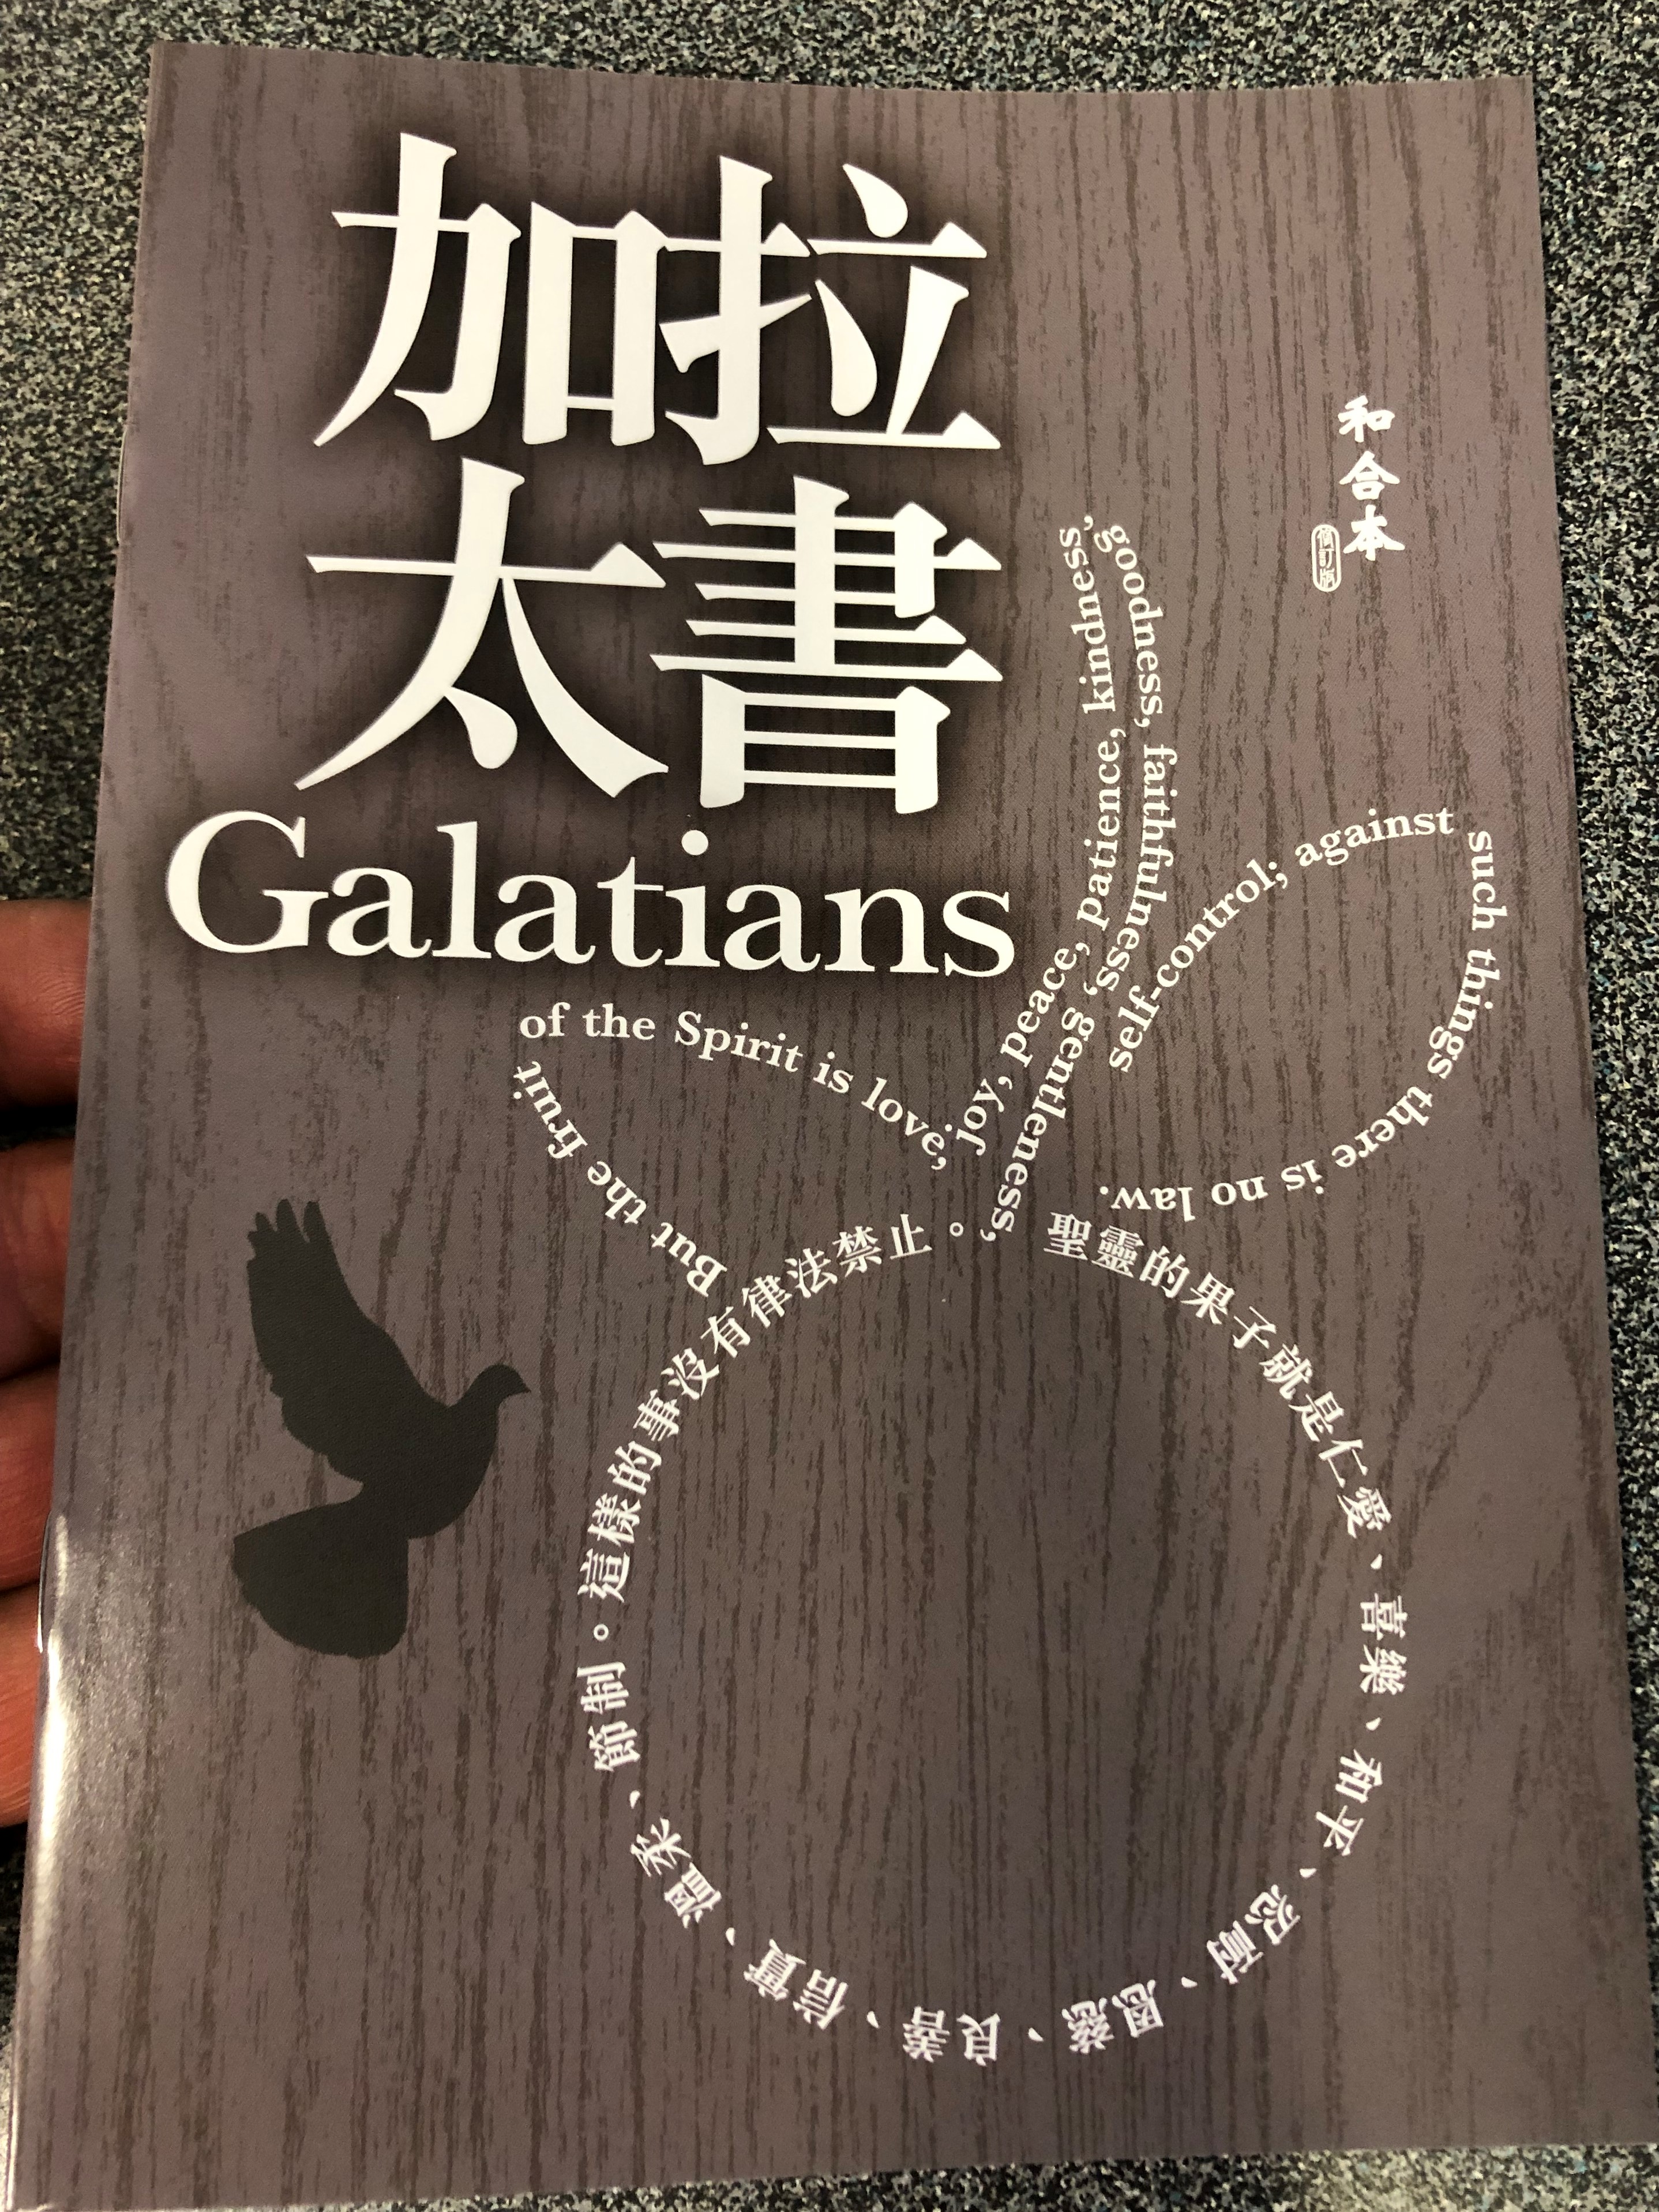 paul-s-letter-to-the-galatians-in-chinese-language-super-large-print-edition-revised-chinese-union-version-cu2010-hkbs-1-.jpg